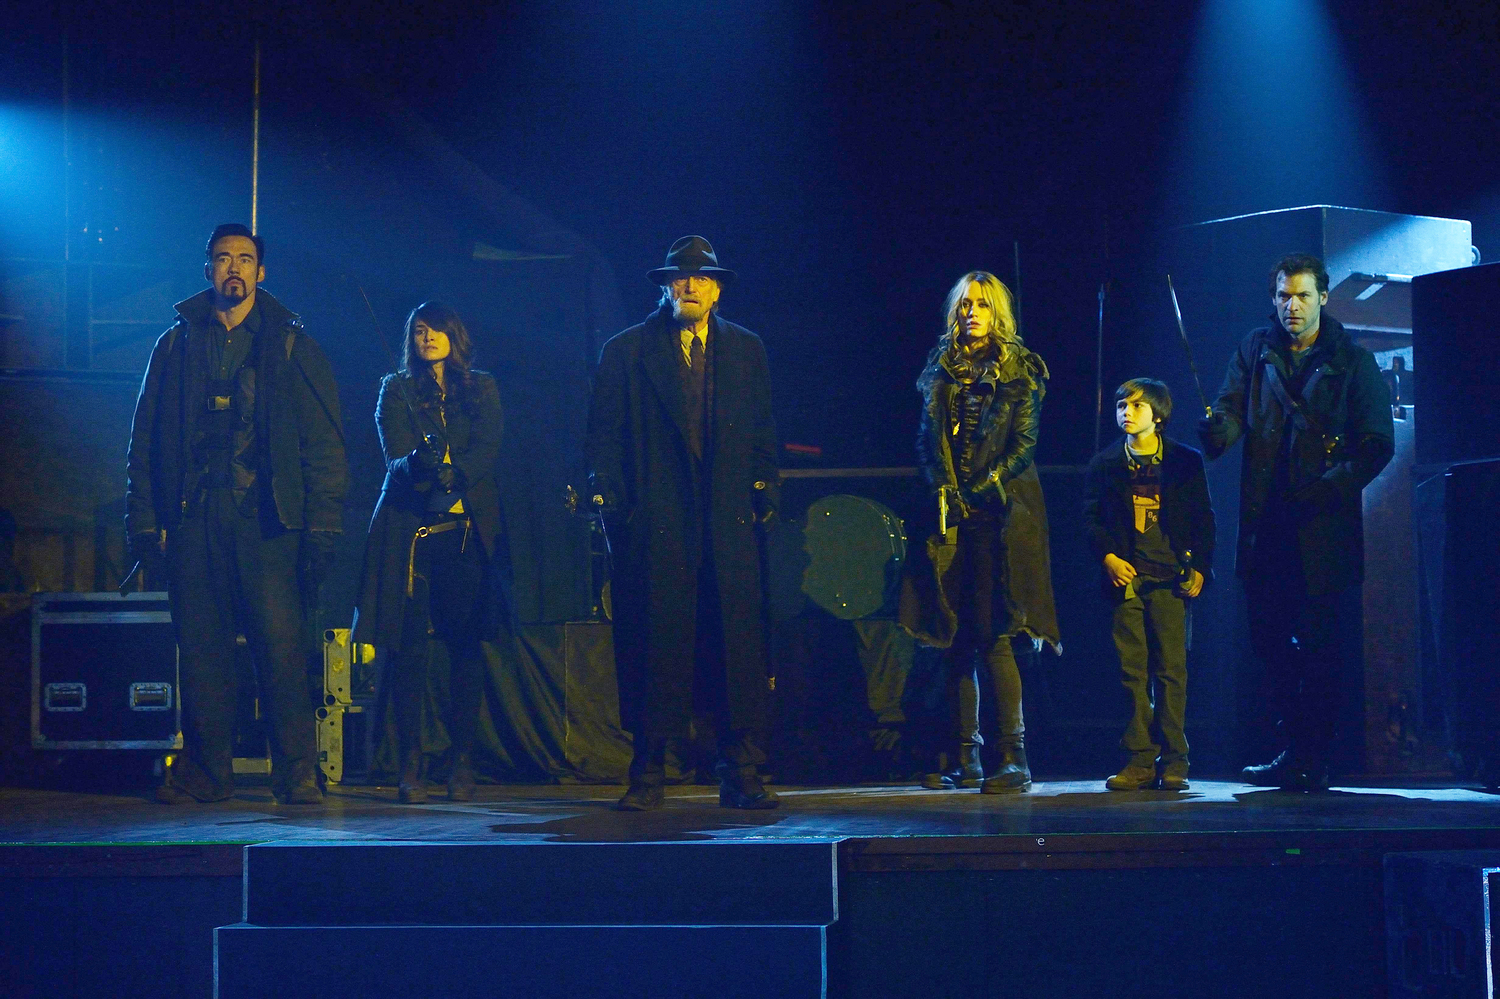 The Strain Episode 13 ‘The Master’ Airs Sunday on FX